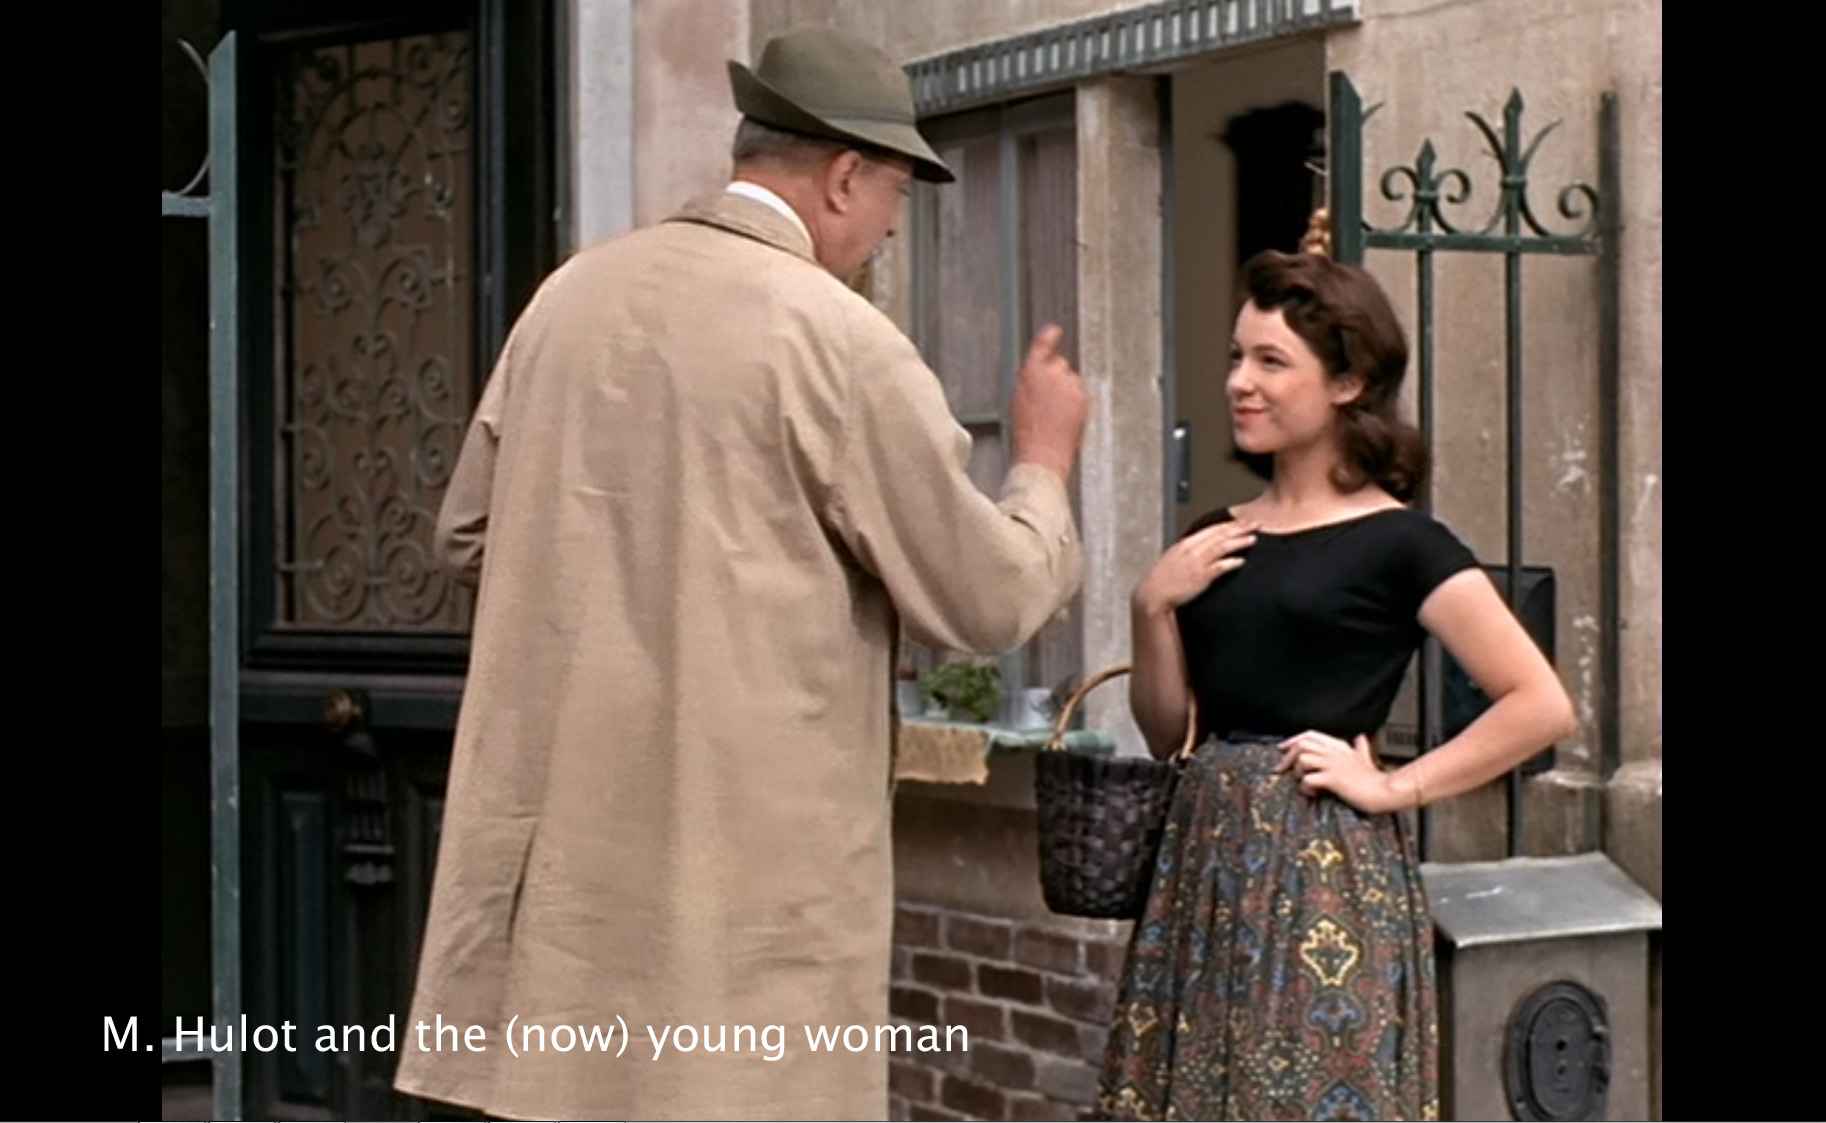 Hulot and the (now) young woman